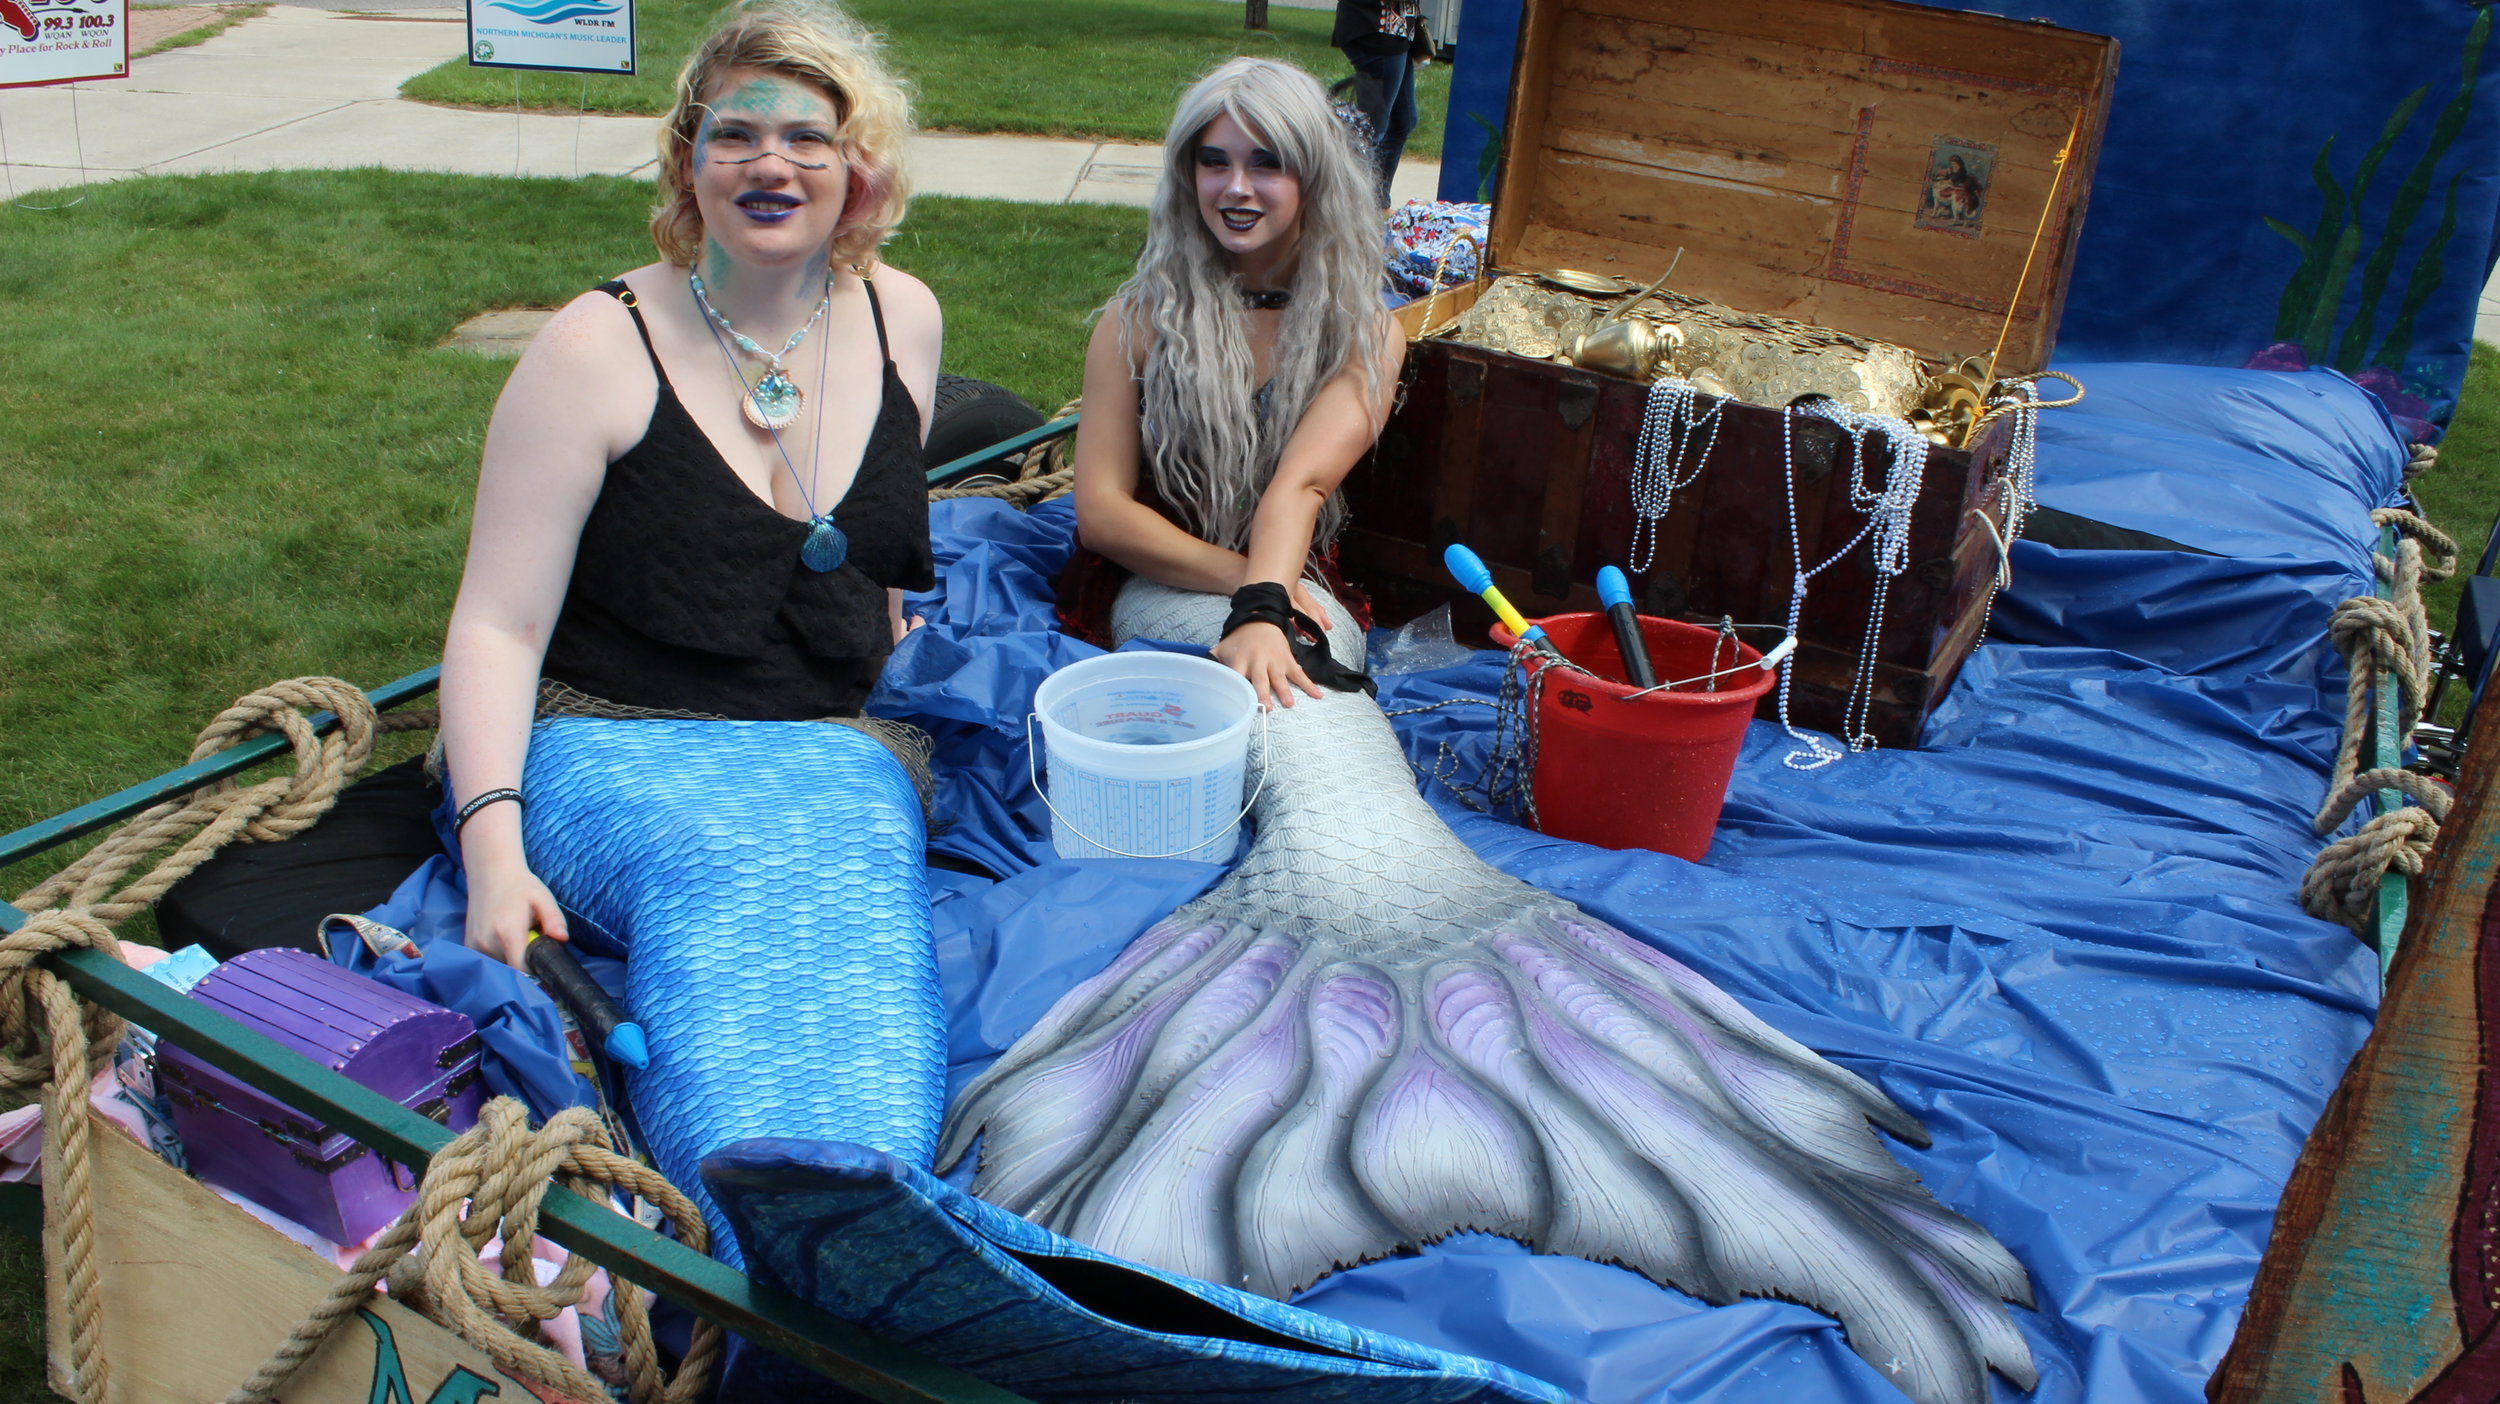 Mermaids at the Boyne City Pirate Fest 2019 ♥ Pictures, Videos